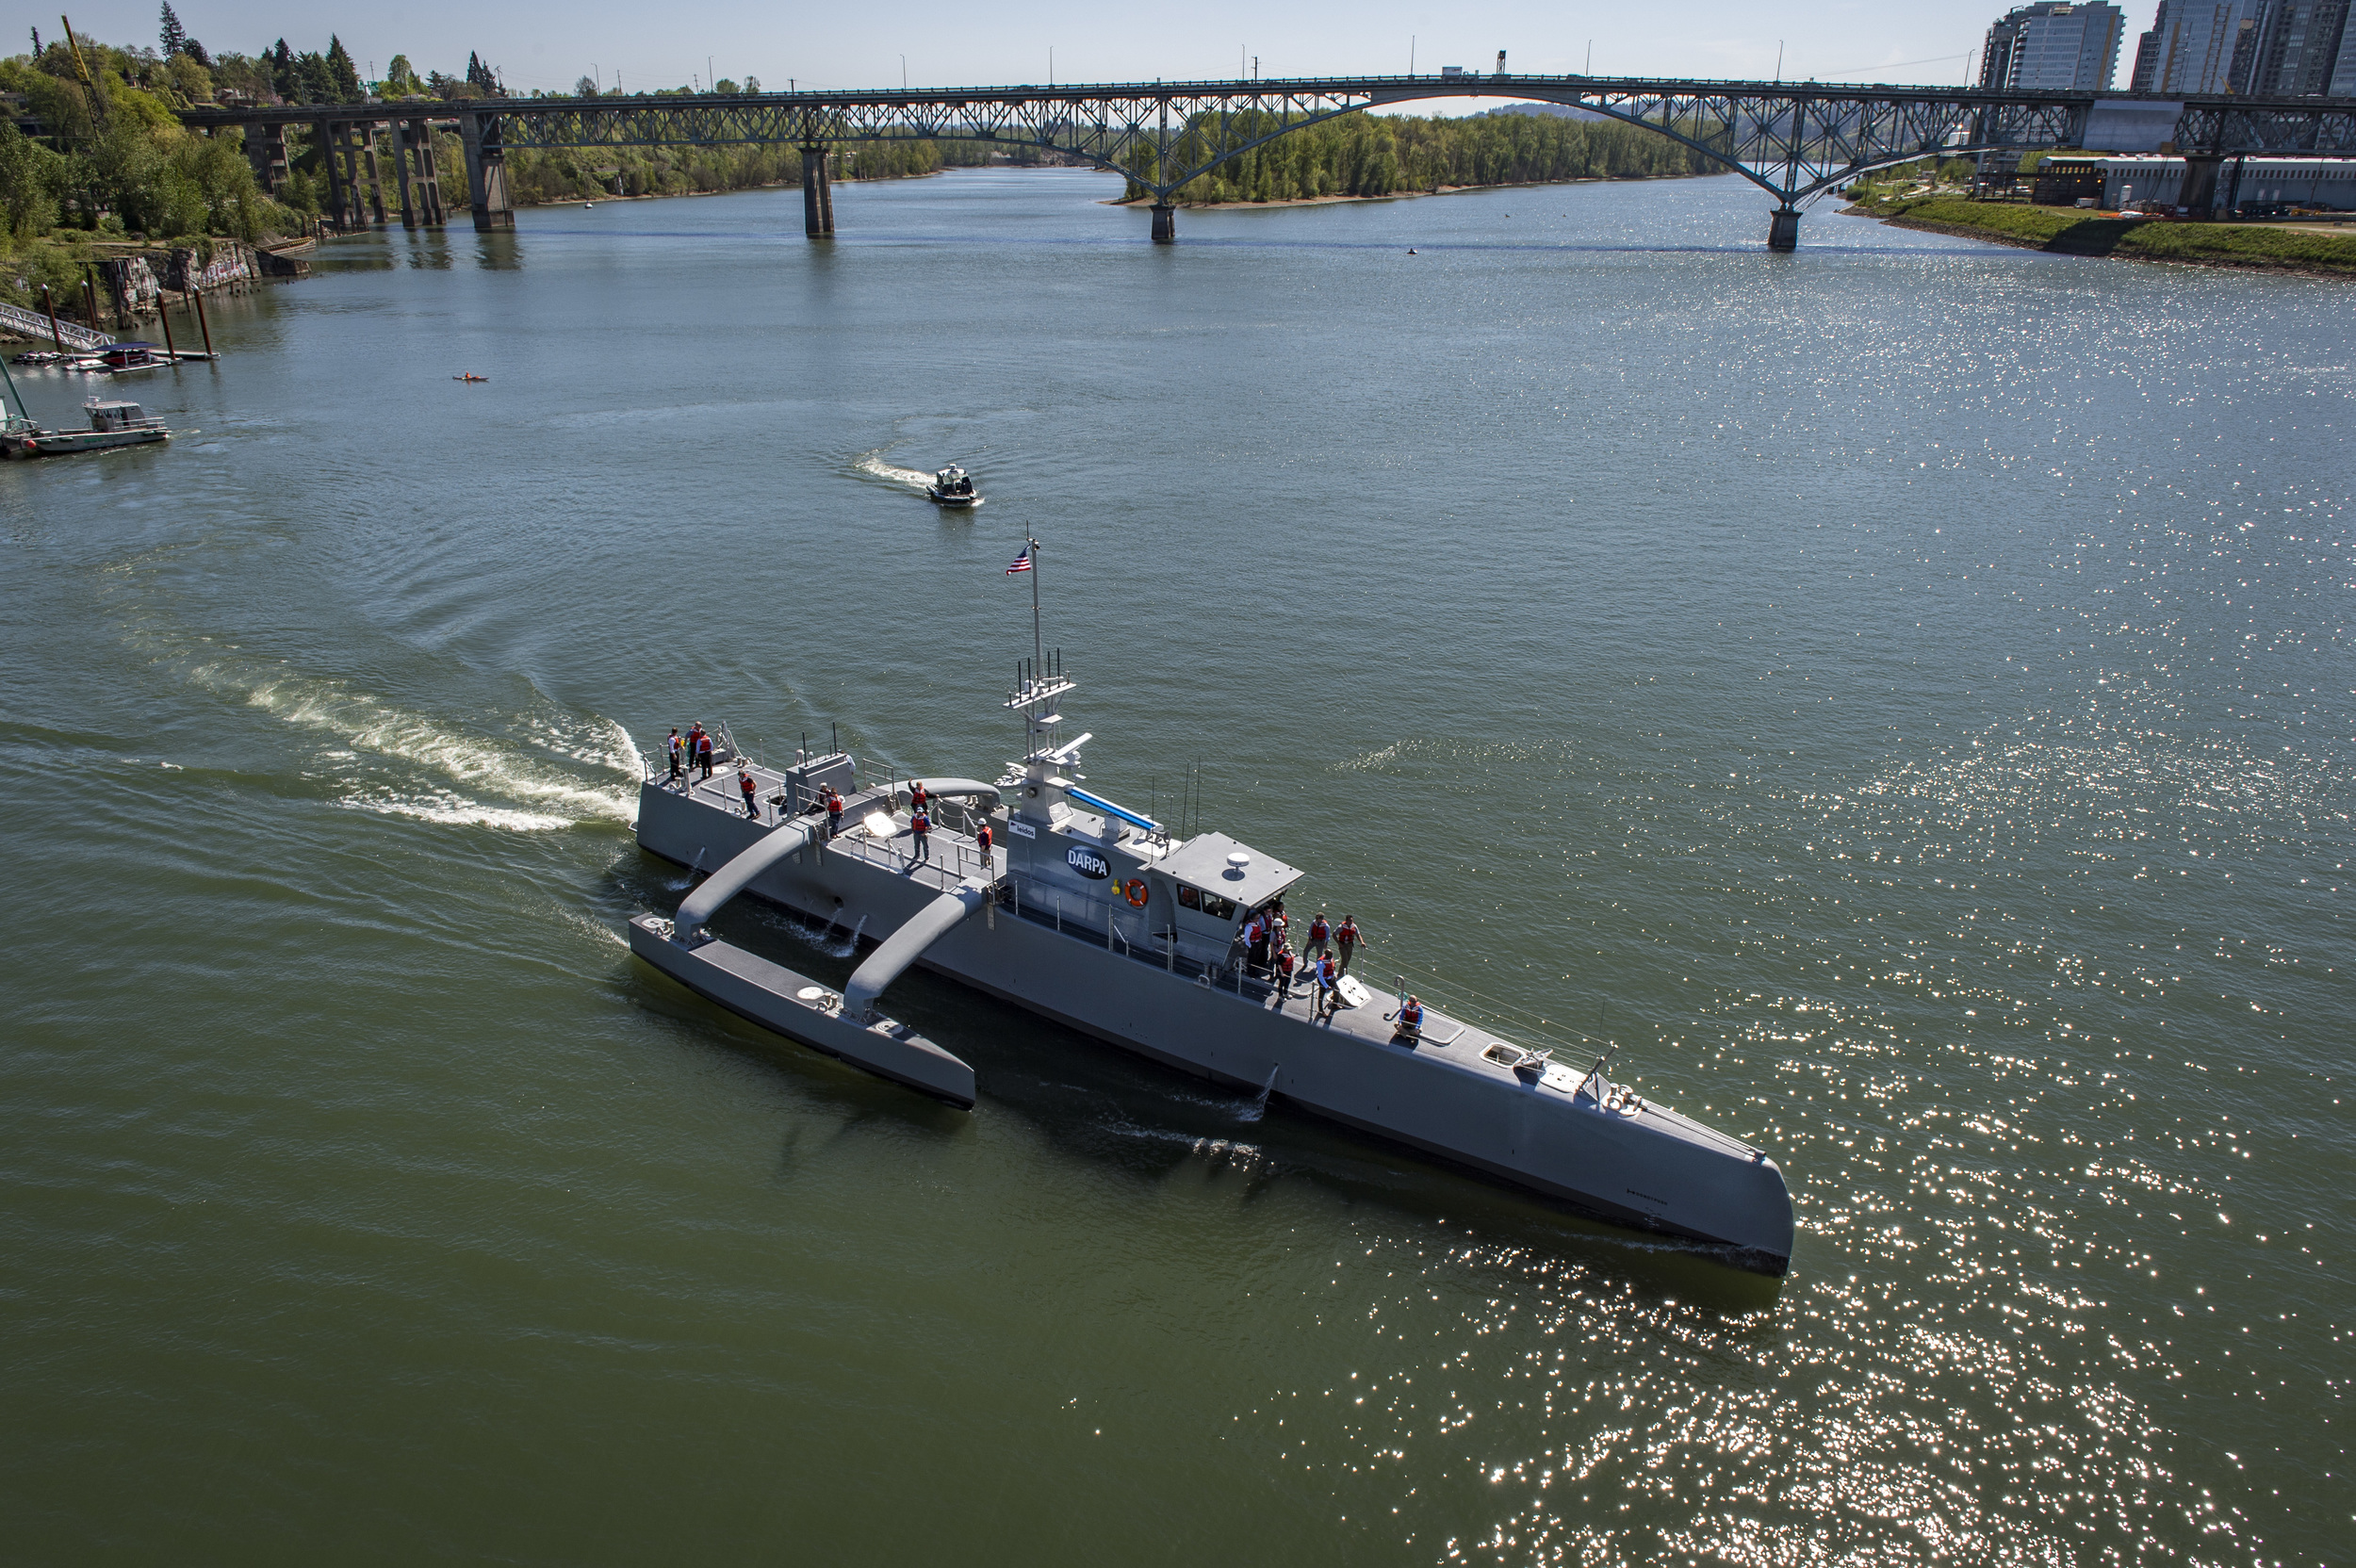  PORTLAND, Oregon - Sea Hunter, an entirely new class of unmanned ocean-going vessel gets underway on the Williammette River following a christening ceremony in Portland, Oregon. Part the of the Defense Advanced Research Projects Agency (DARPA)'s Ant